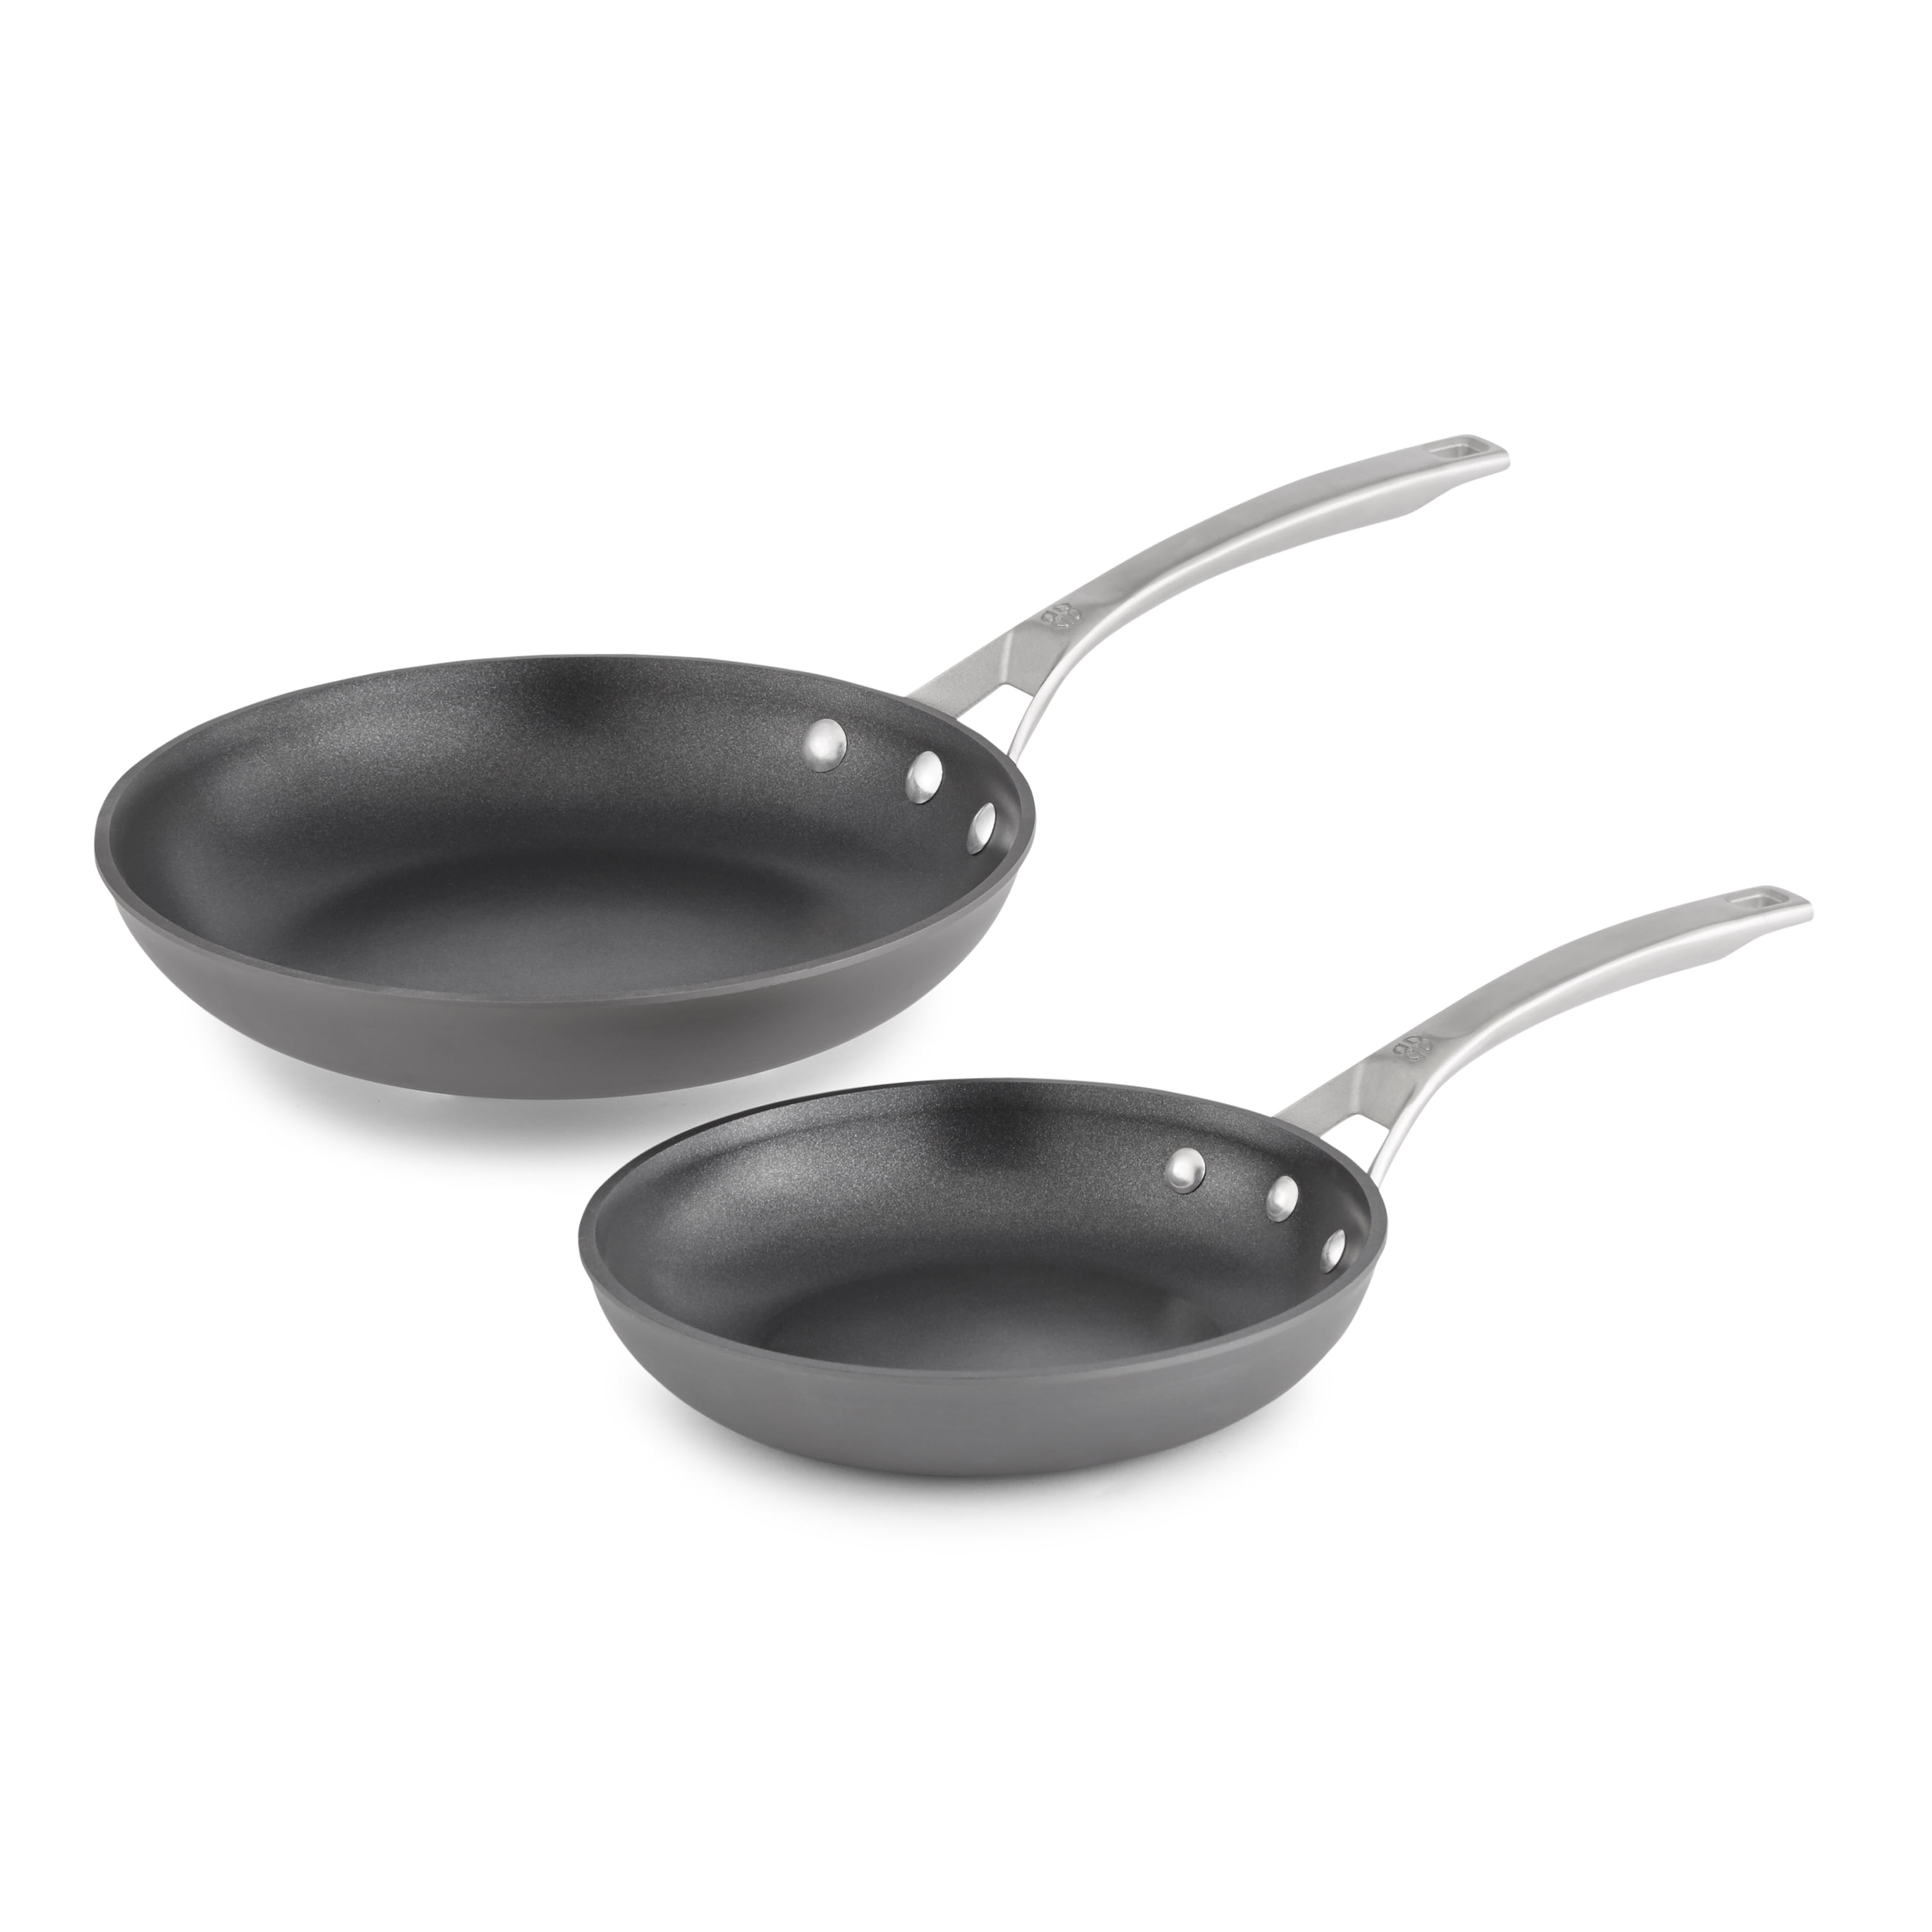 Calphalon 1876984 Contemporary Nonstick Dishwasher Safe Omelette Pan 10 Inc for sale online 